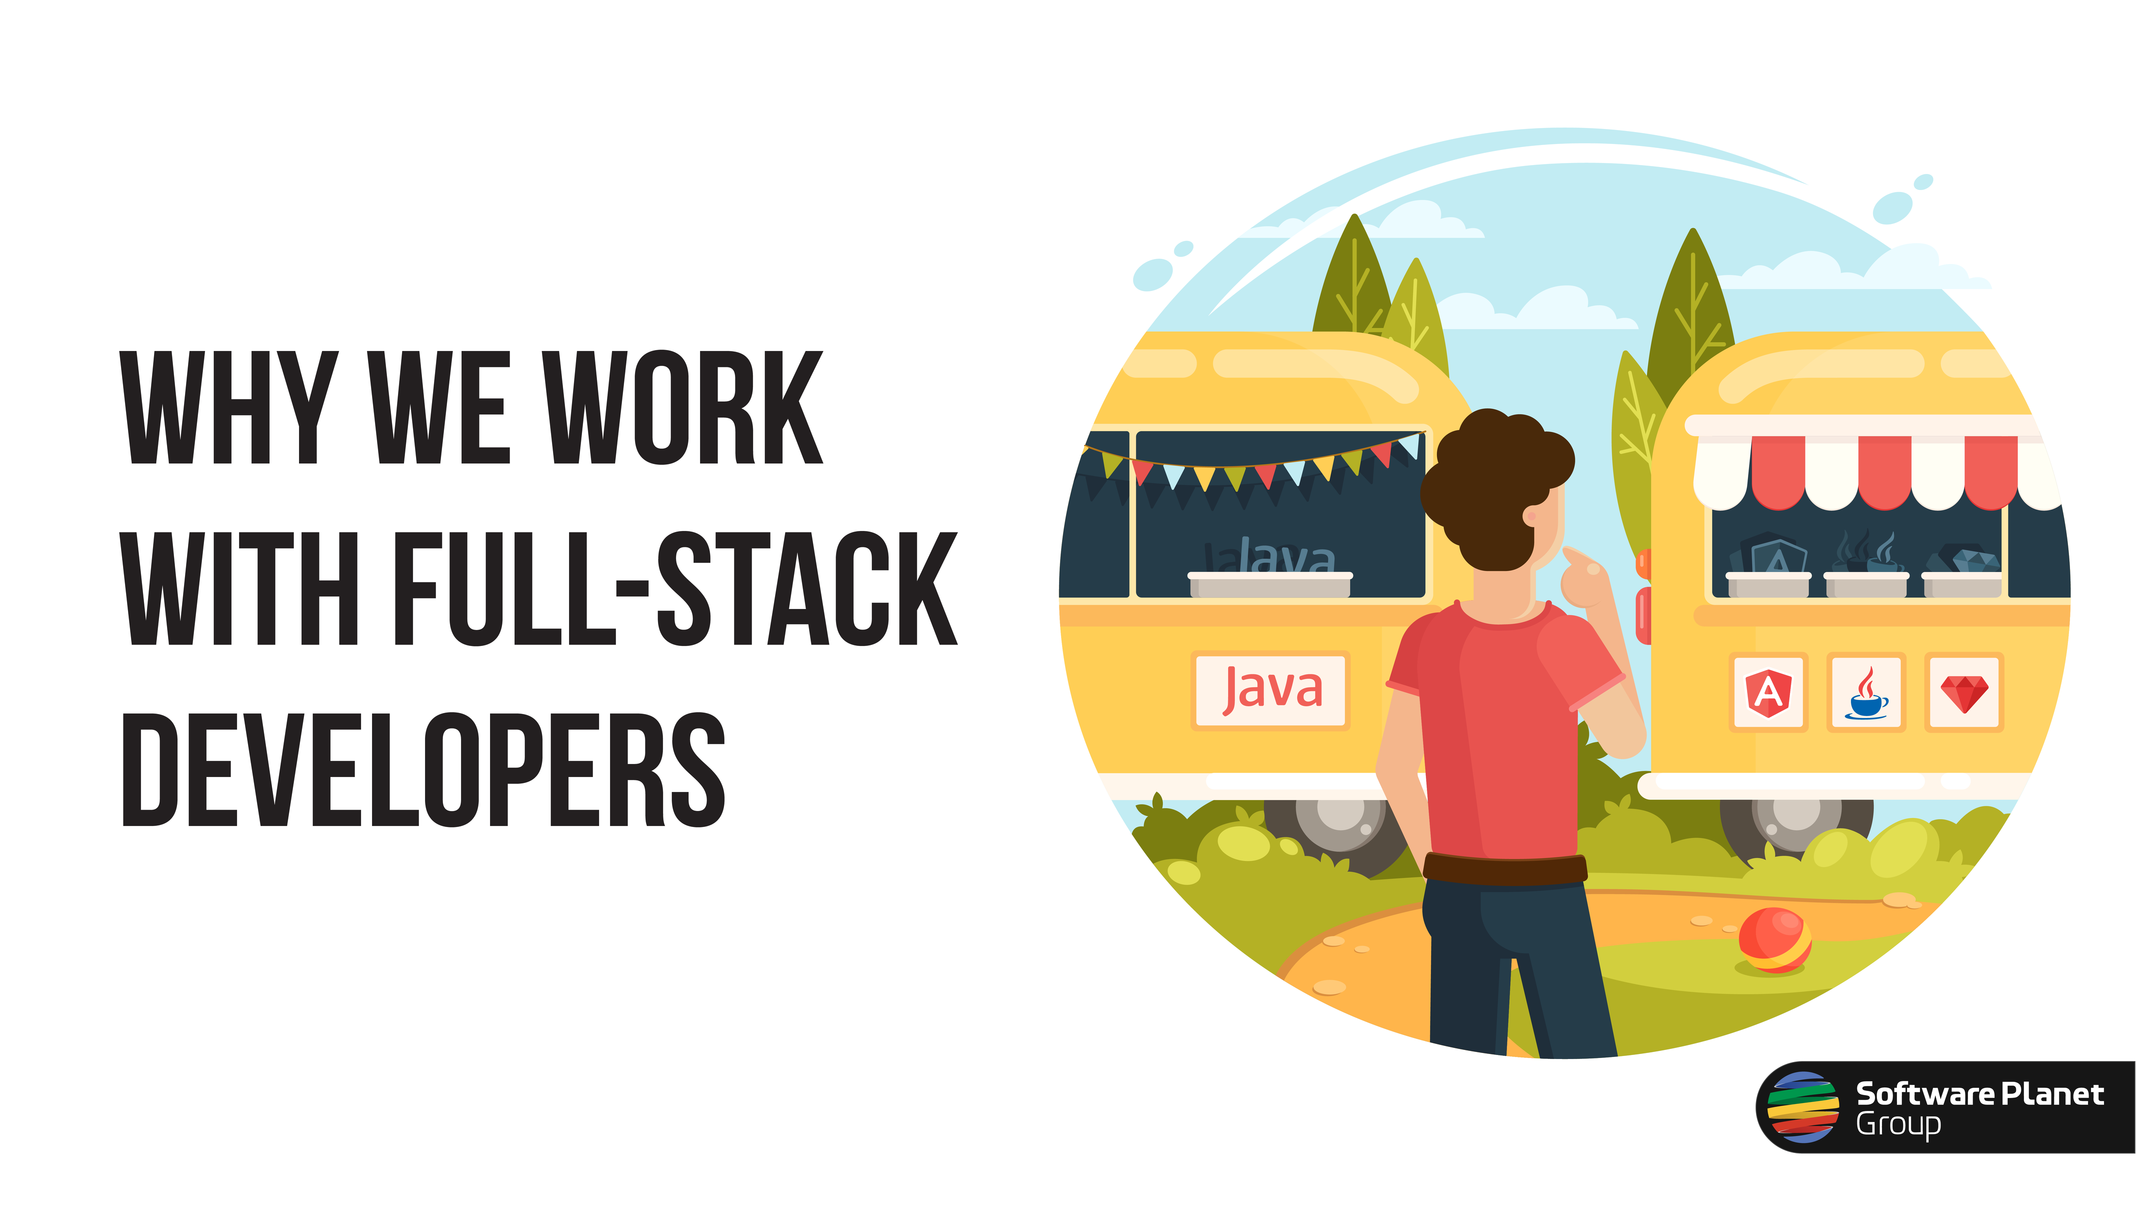 Why We Work With Full-Stack Developers